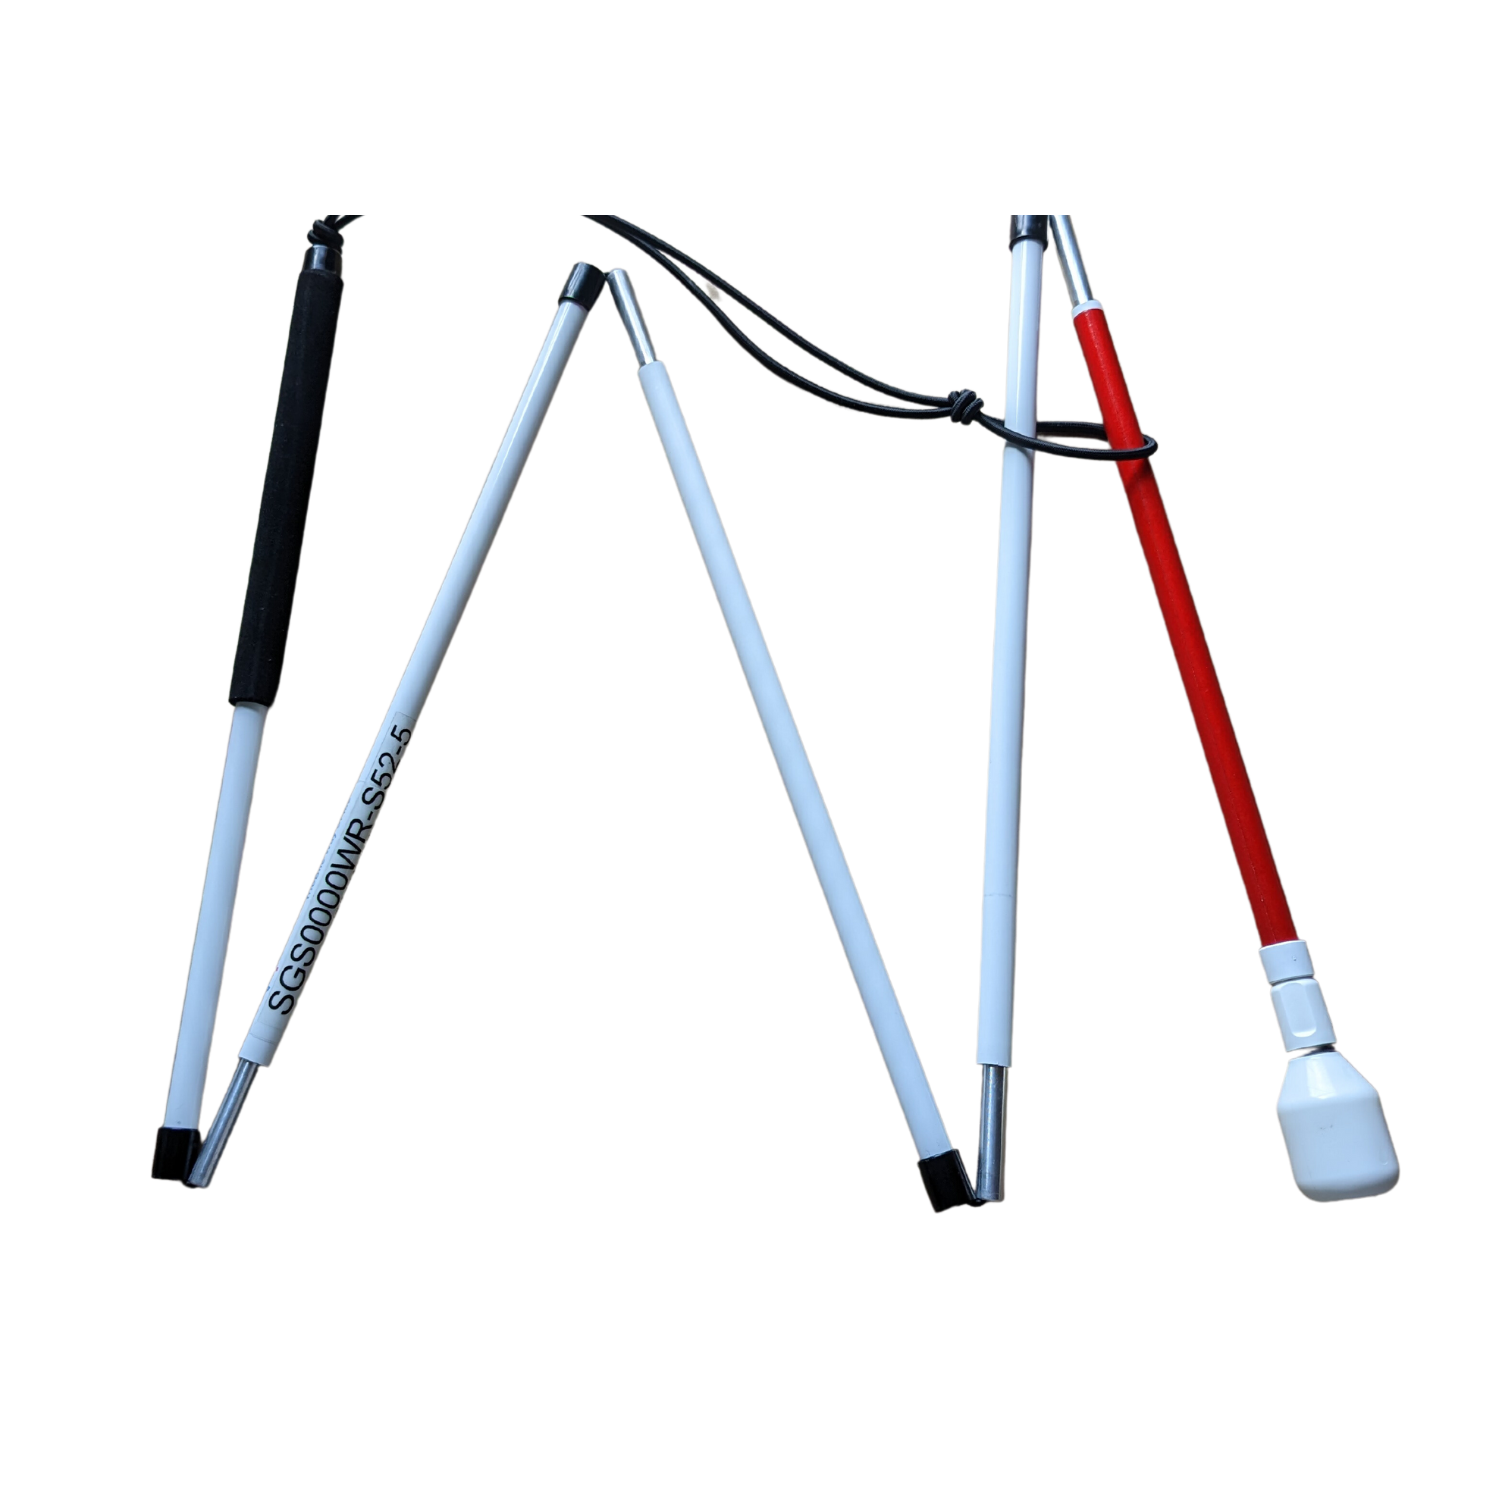 Image of a Slimline ID/Symbol white cane with a white marshmallow tip from Ambutech